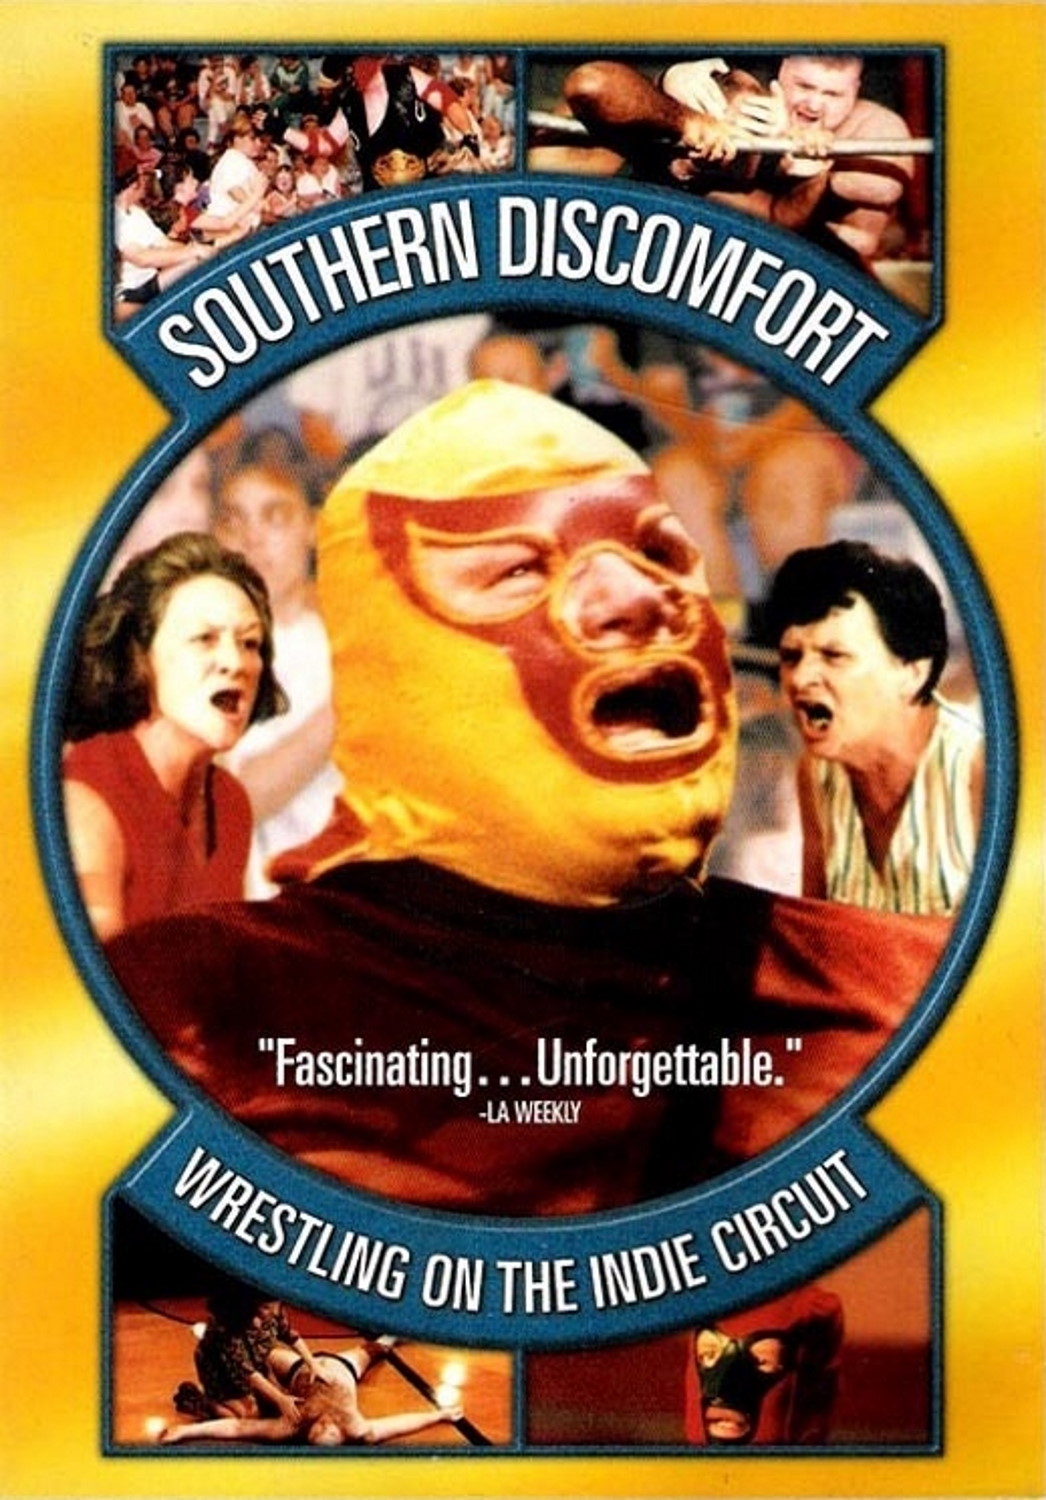 Southern Discomfort: Wrestling on the Indie Circuit (2002) Poster